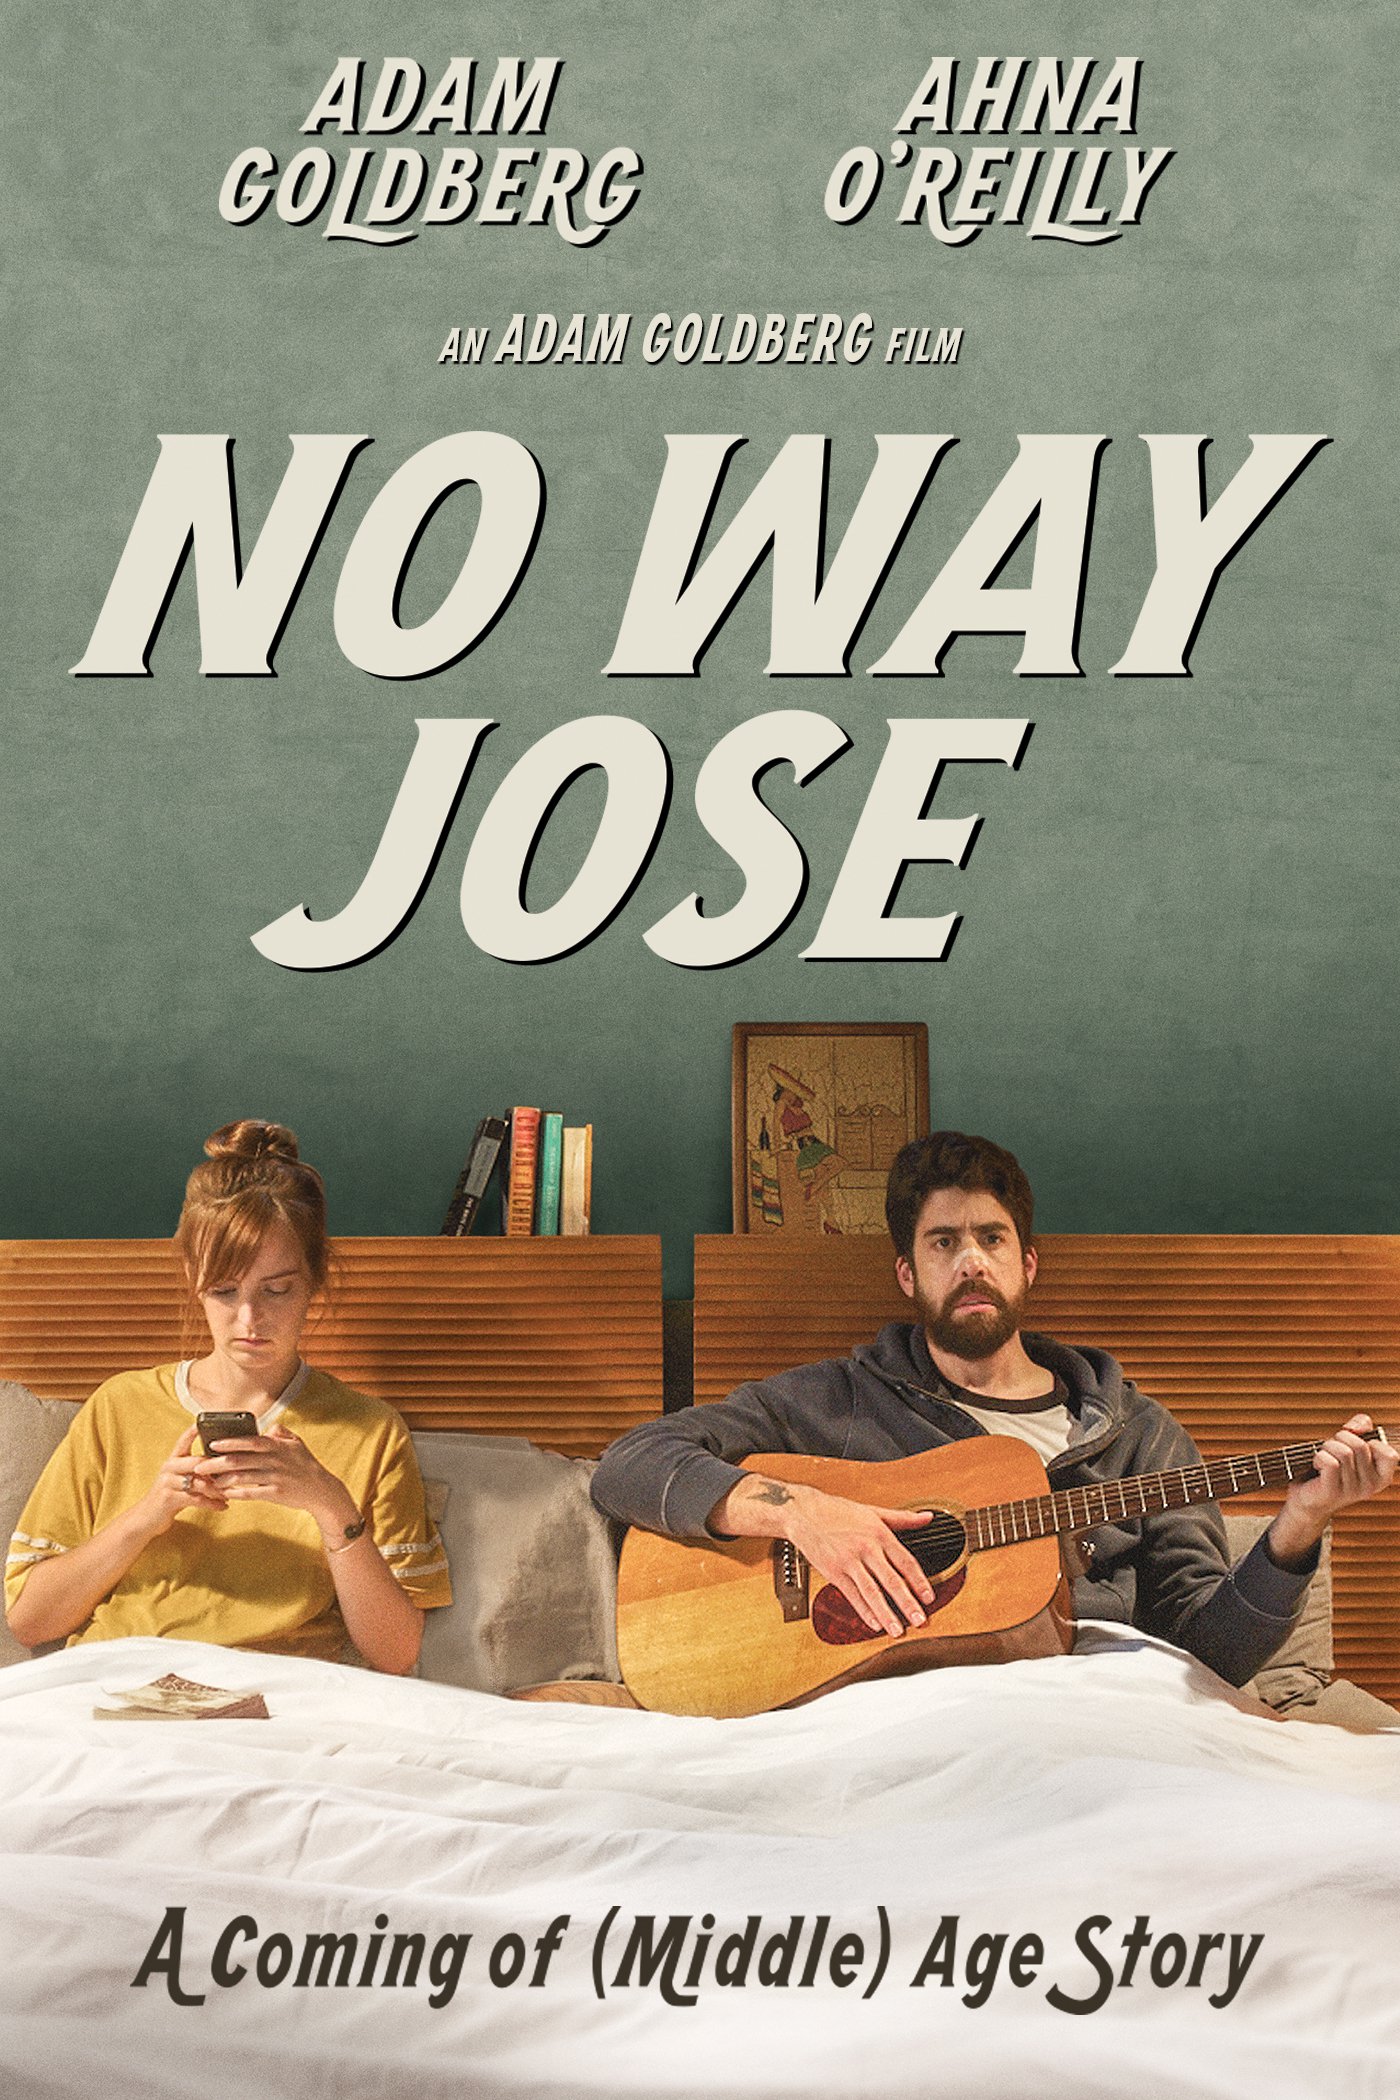 Poster for the movie "No Way Jose"